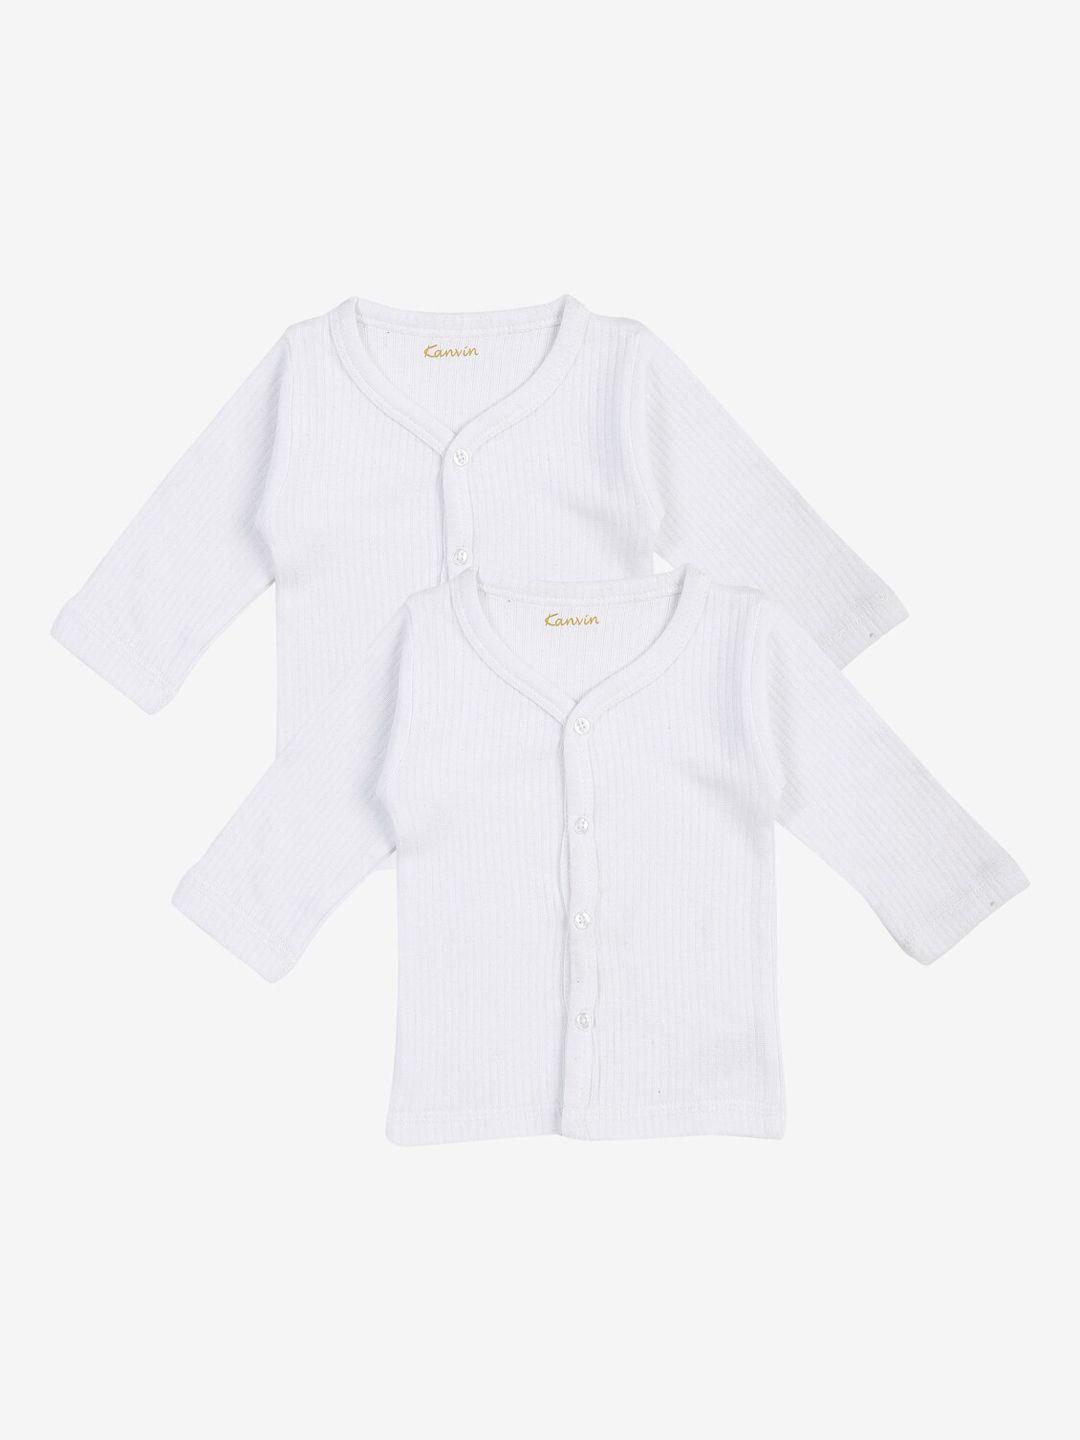 kanvin-boys-pack-of-2-white-solid-thermal-tops